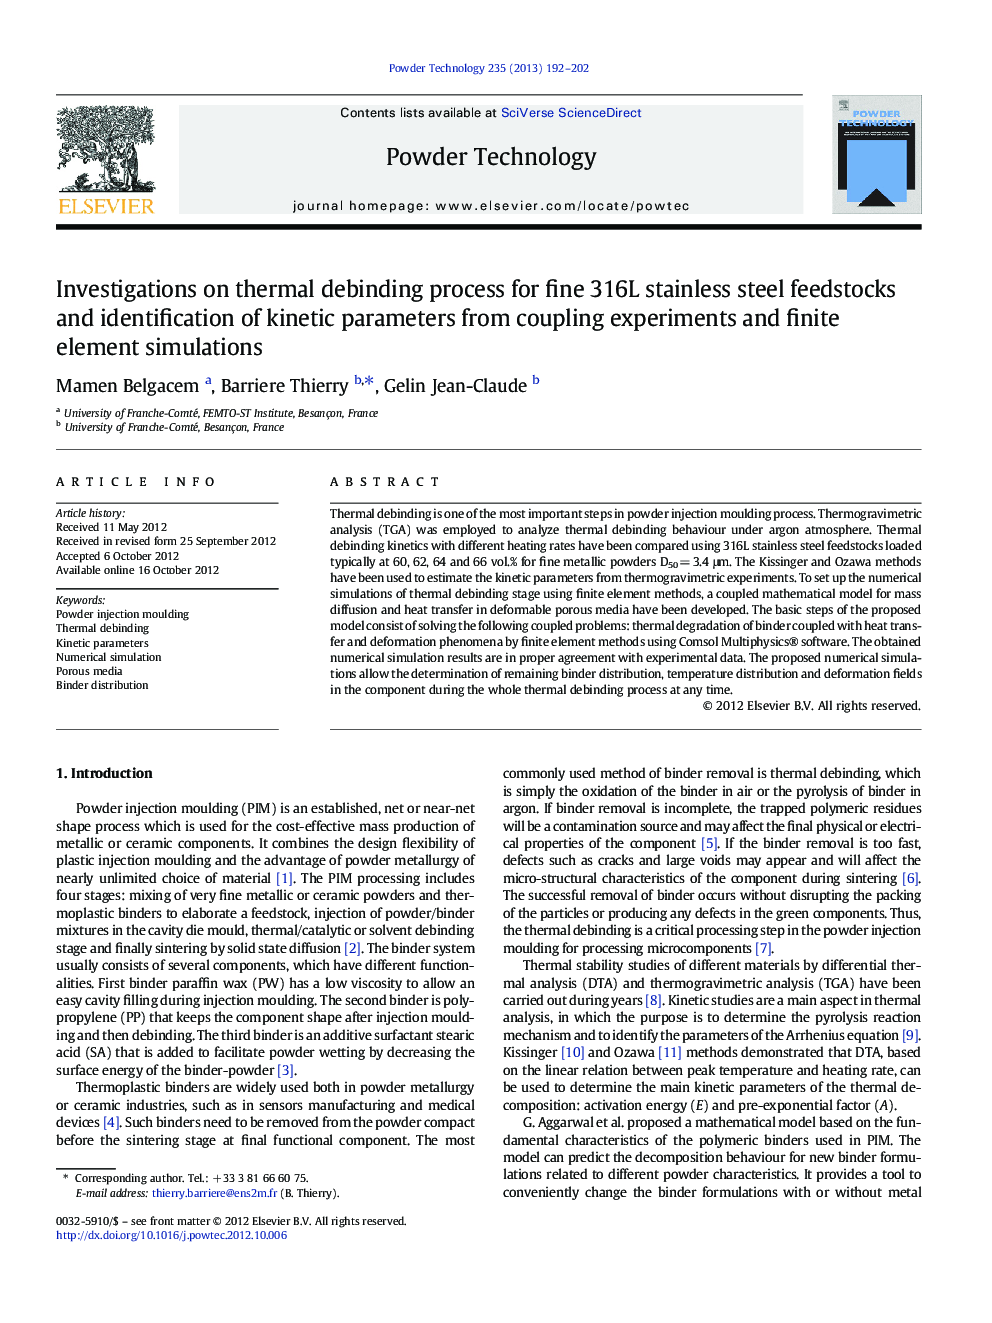 Investigations on thermal debinding process for fine 316L stainless steel feedstocks and identification of kinetic parameters from coupling experiments and finite element simulations